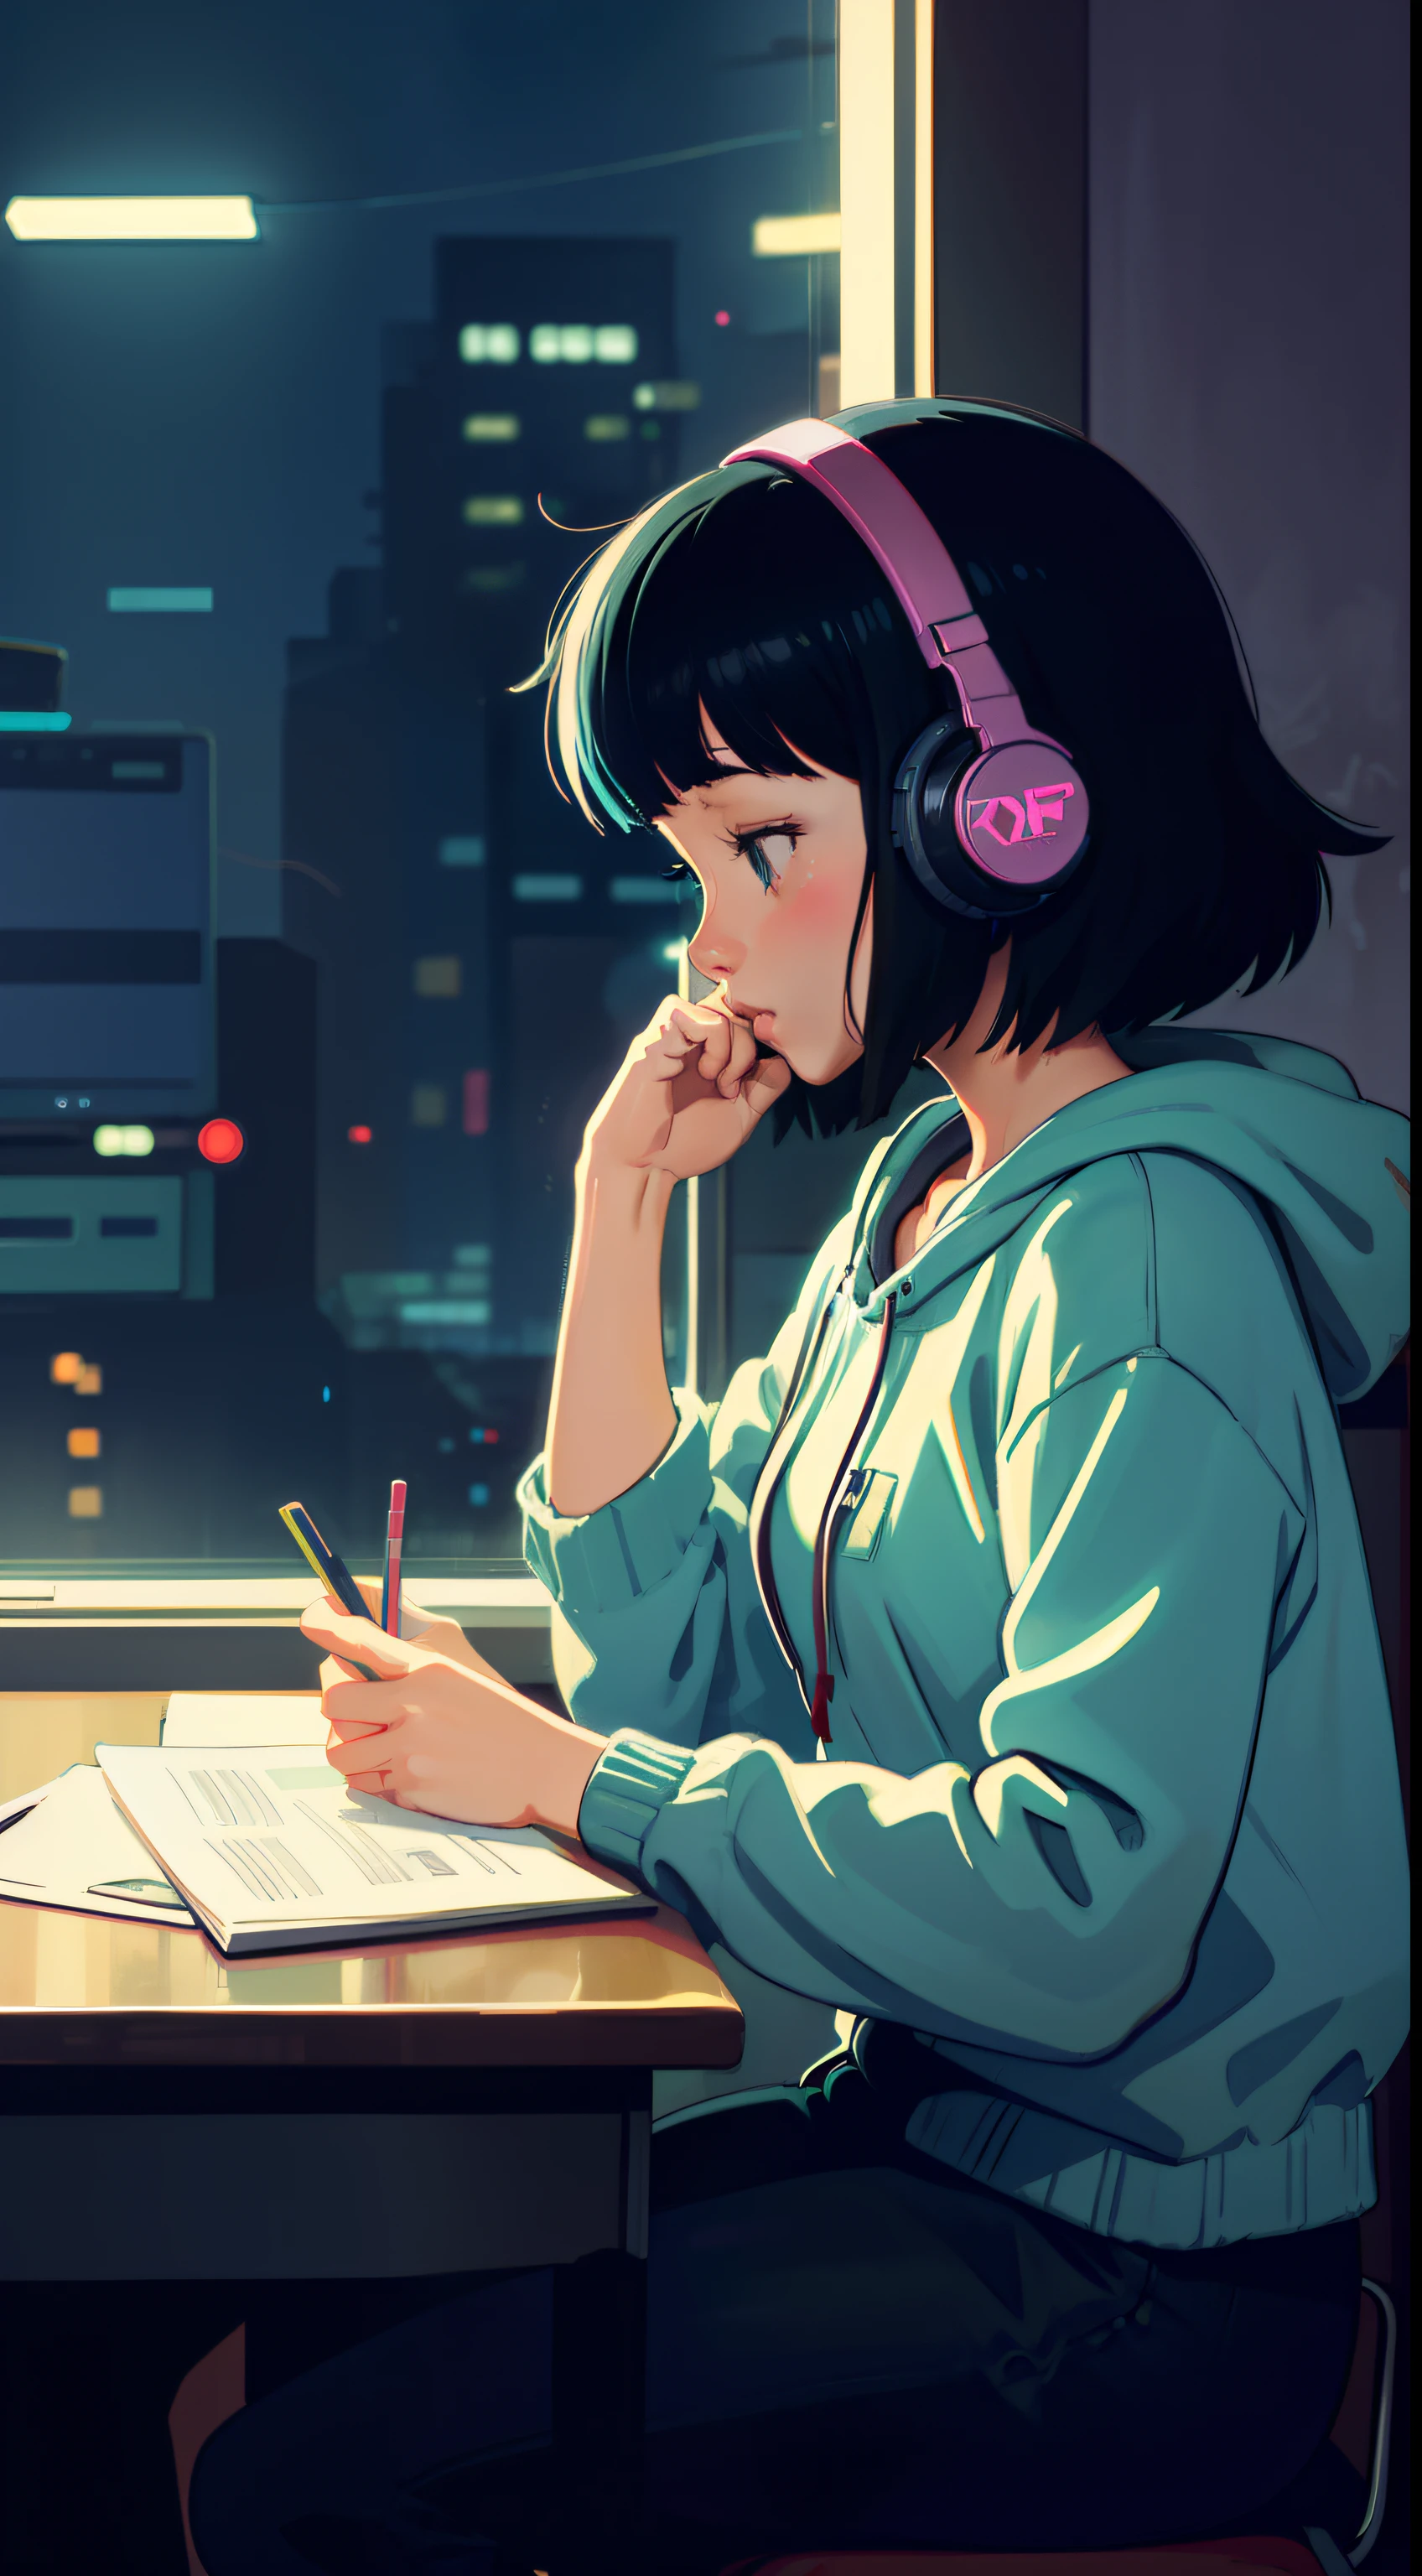 (lofi), Girl studying hard at desk,profile, Put on the headphones, Night light, Neon landscape of rainy day from window,Analog Color Theme, Lo-Fi Hip Hop , Flat, 2.5D ,line-drawing, Ink drawing, Large gradients, watercolor paiting, Goosch color, Studio Ghibli style, Awesome colorful, Outturn, Synth Wave, lofi art,90s style,Old textures, amplitude,90s atmosphere, masutepiece, Huge skills